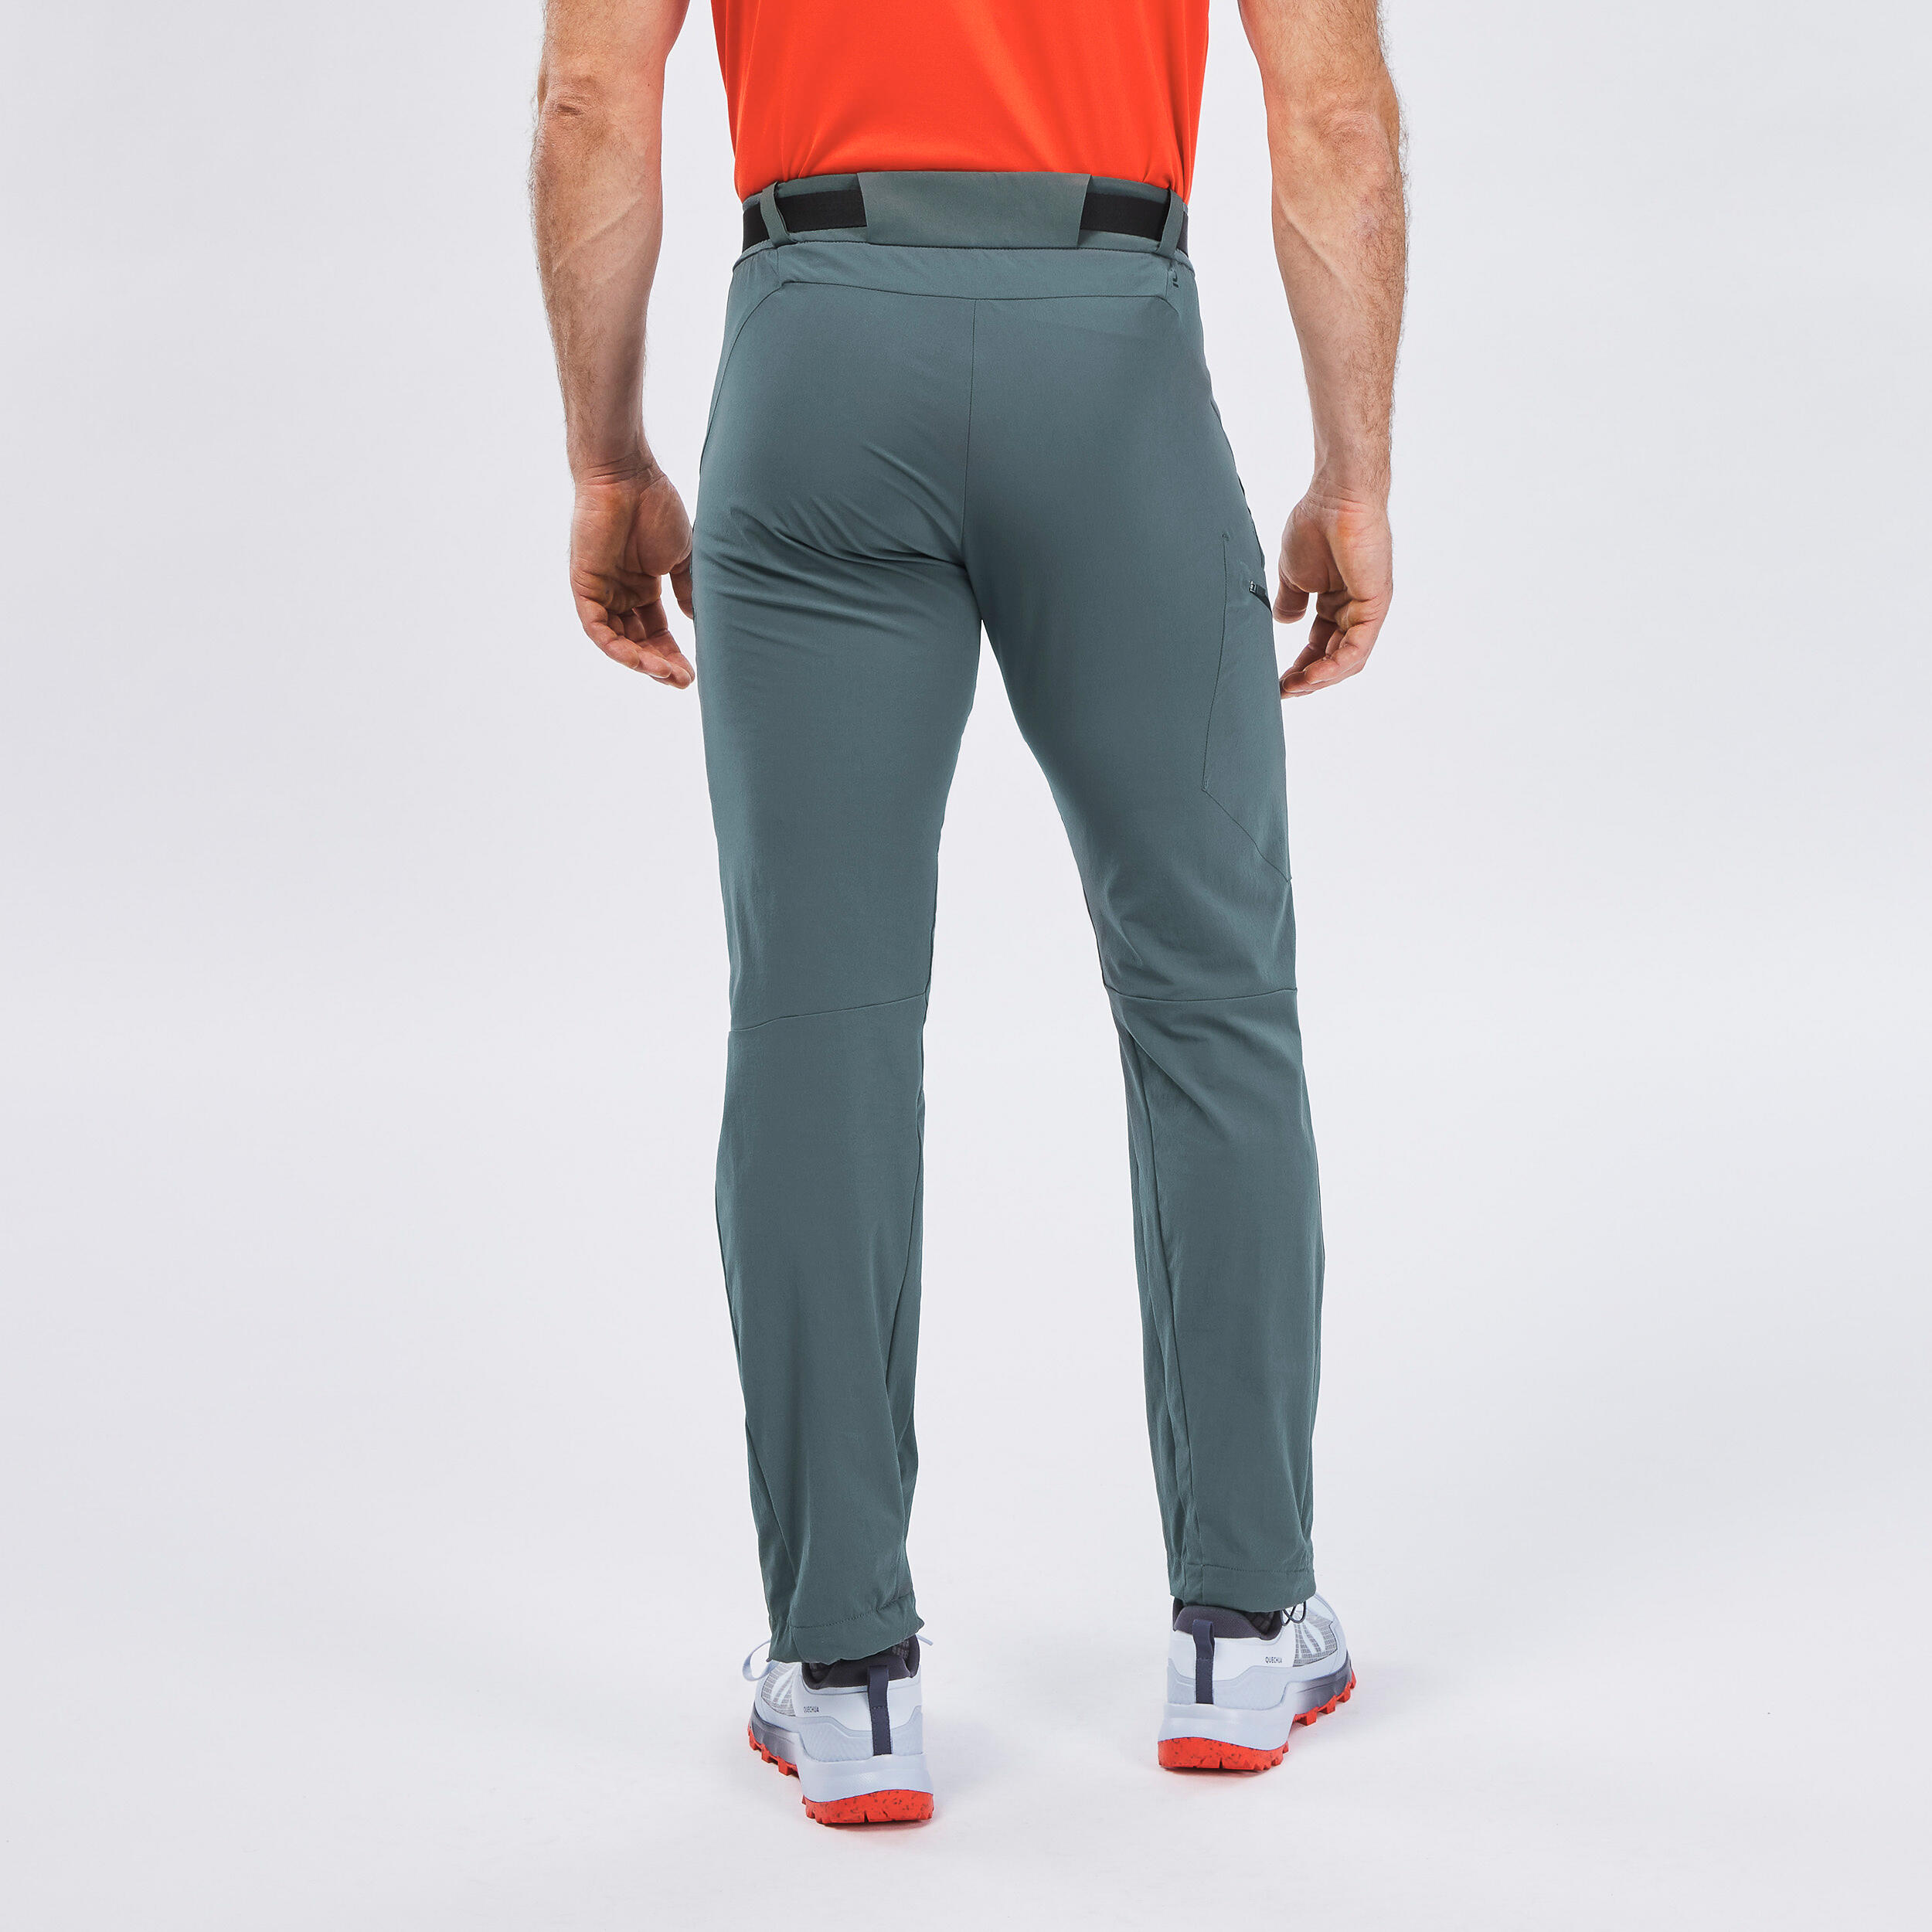 Waterproof / Over-trousers (men and women), Men's Fashion, Bottoms, Trousers  on Carousell